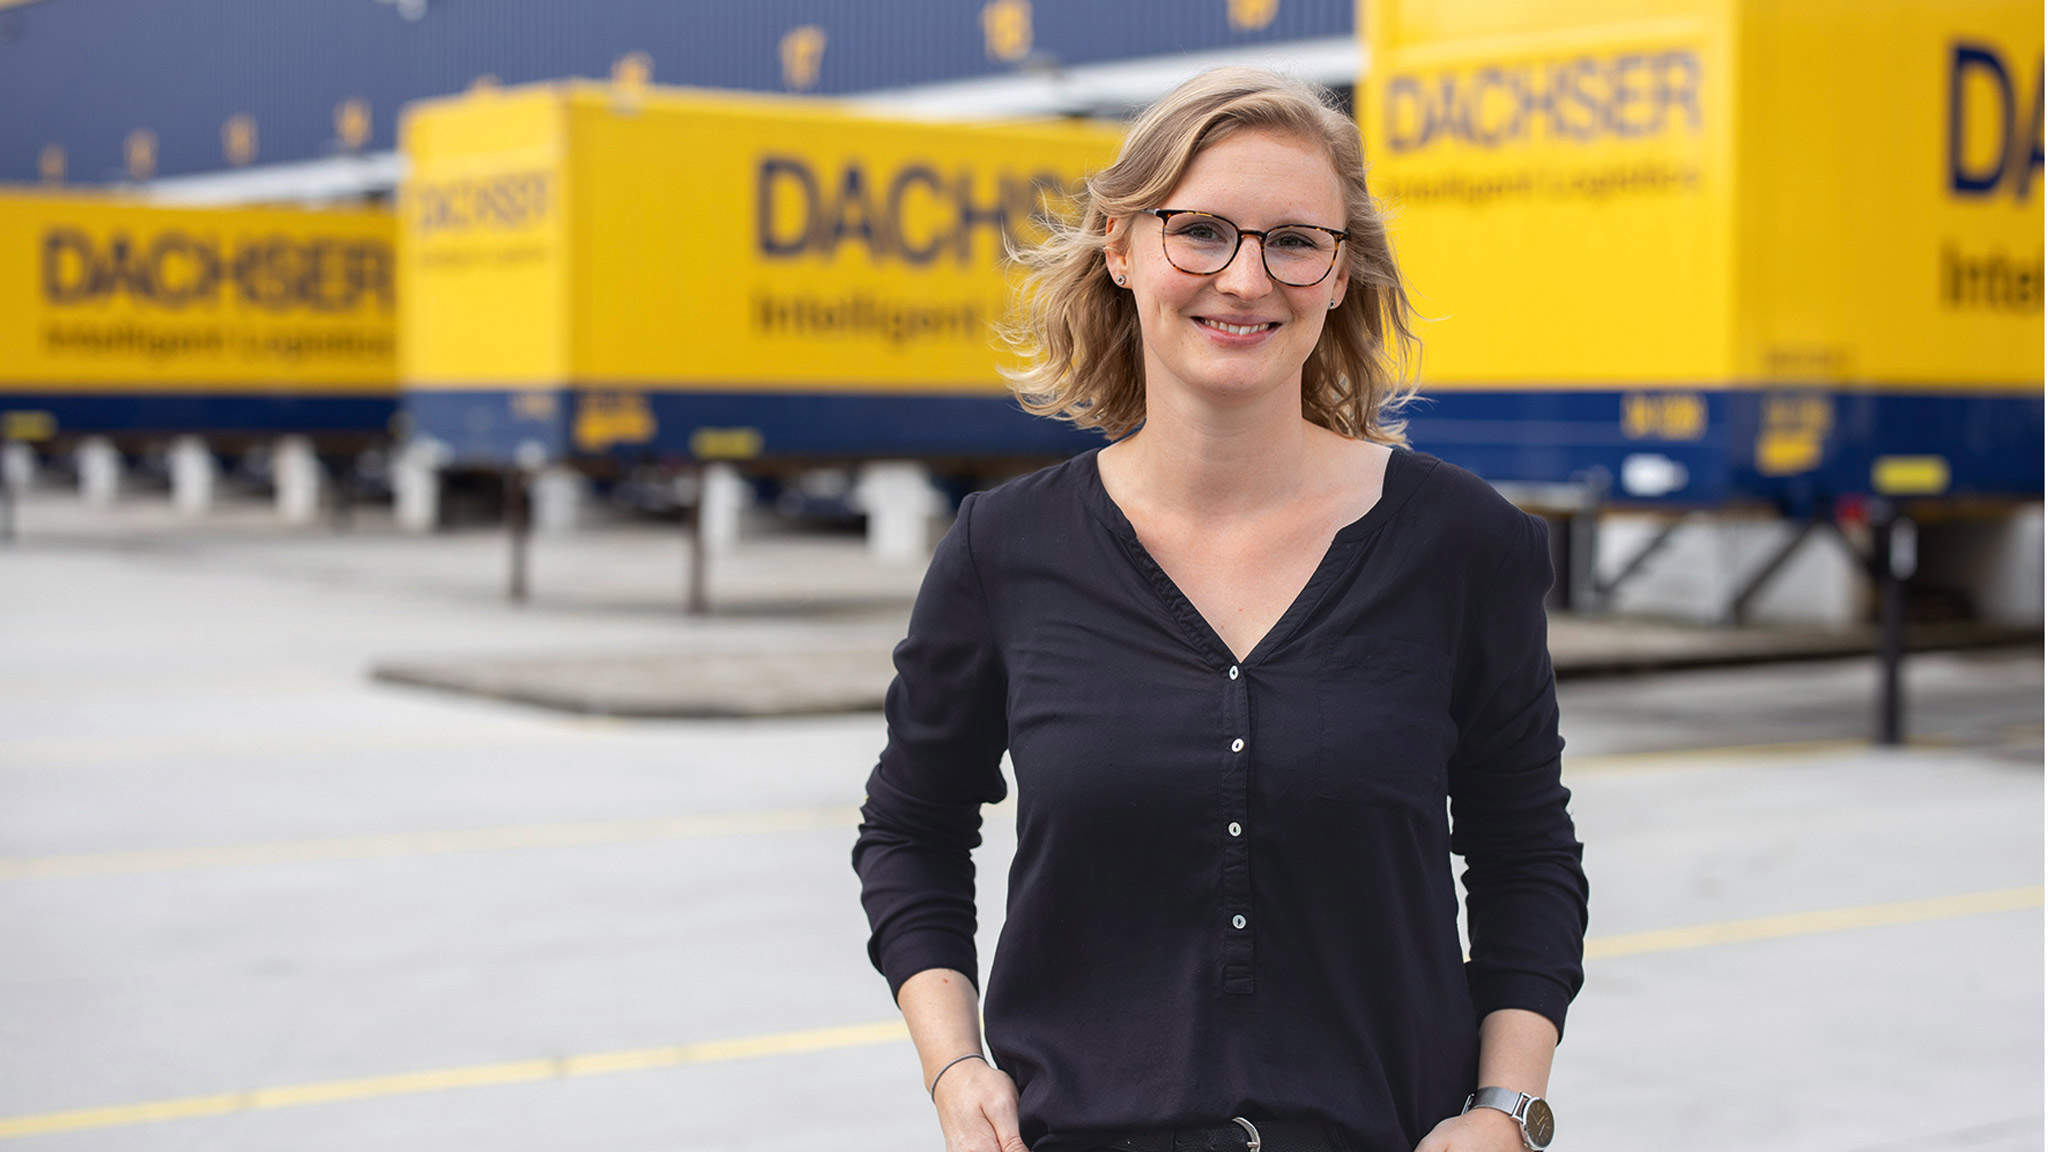 Anna Baierl feels at home in logistics. (Picture: Sebastian Grenzing)